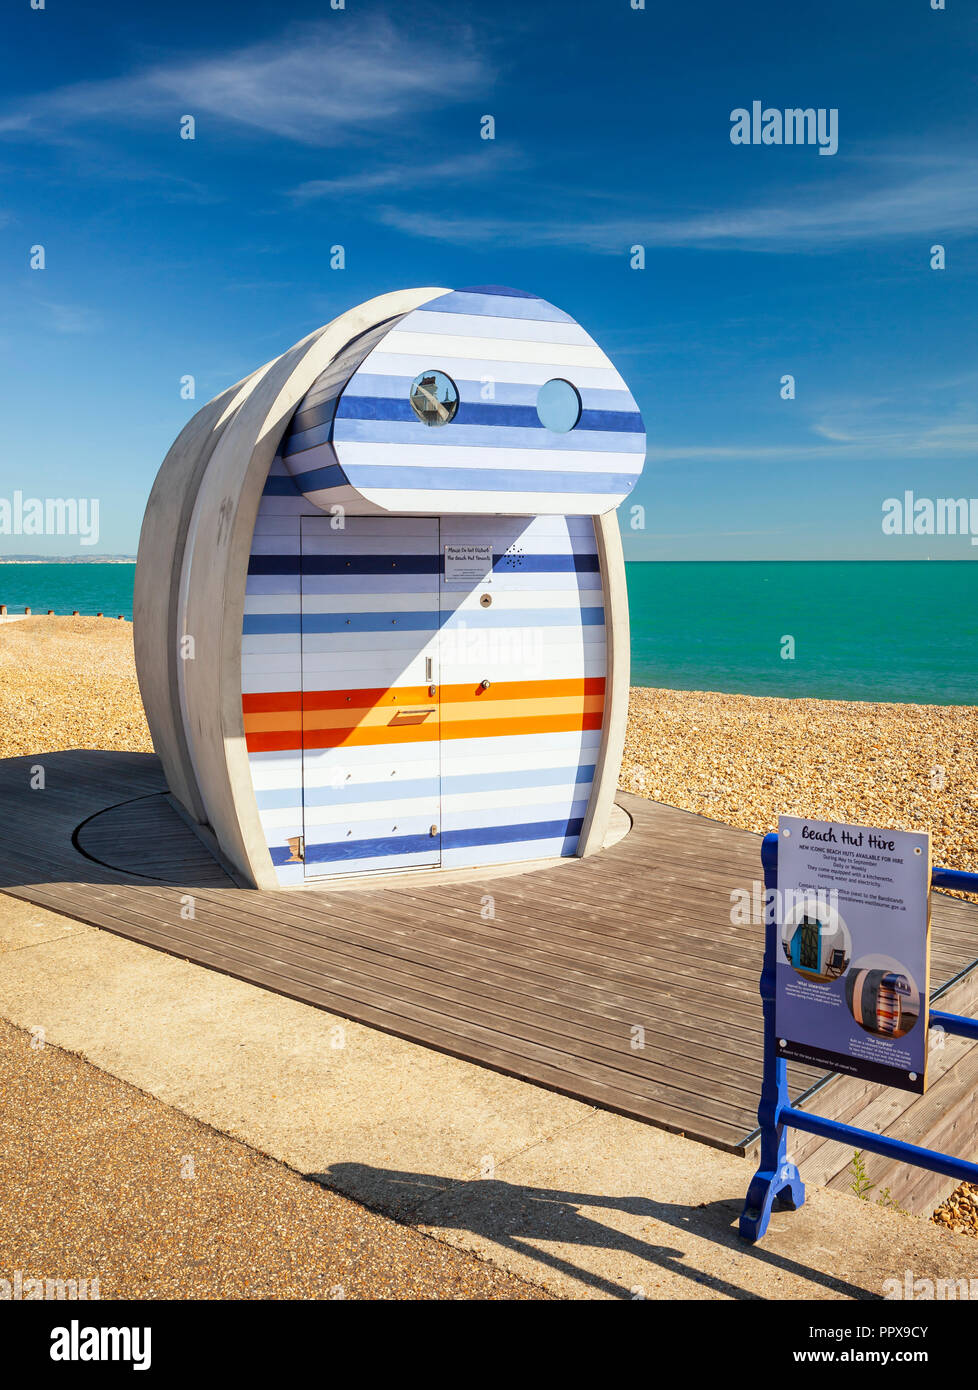 Iconic 'Spy Glass' for hire beach hut on Eastbourne seafront. Stock Photo